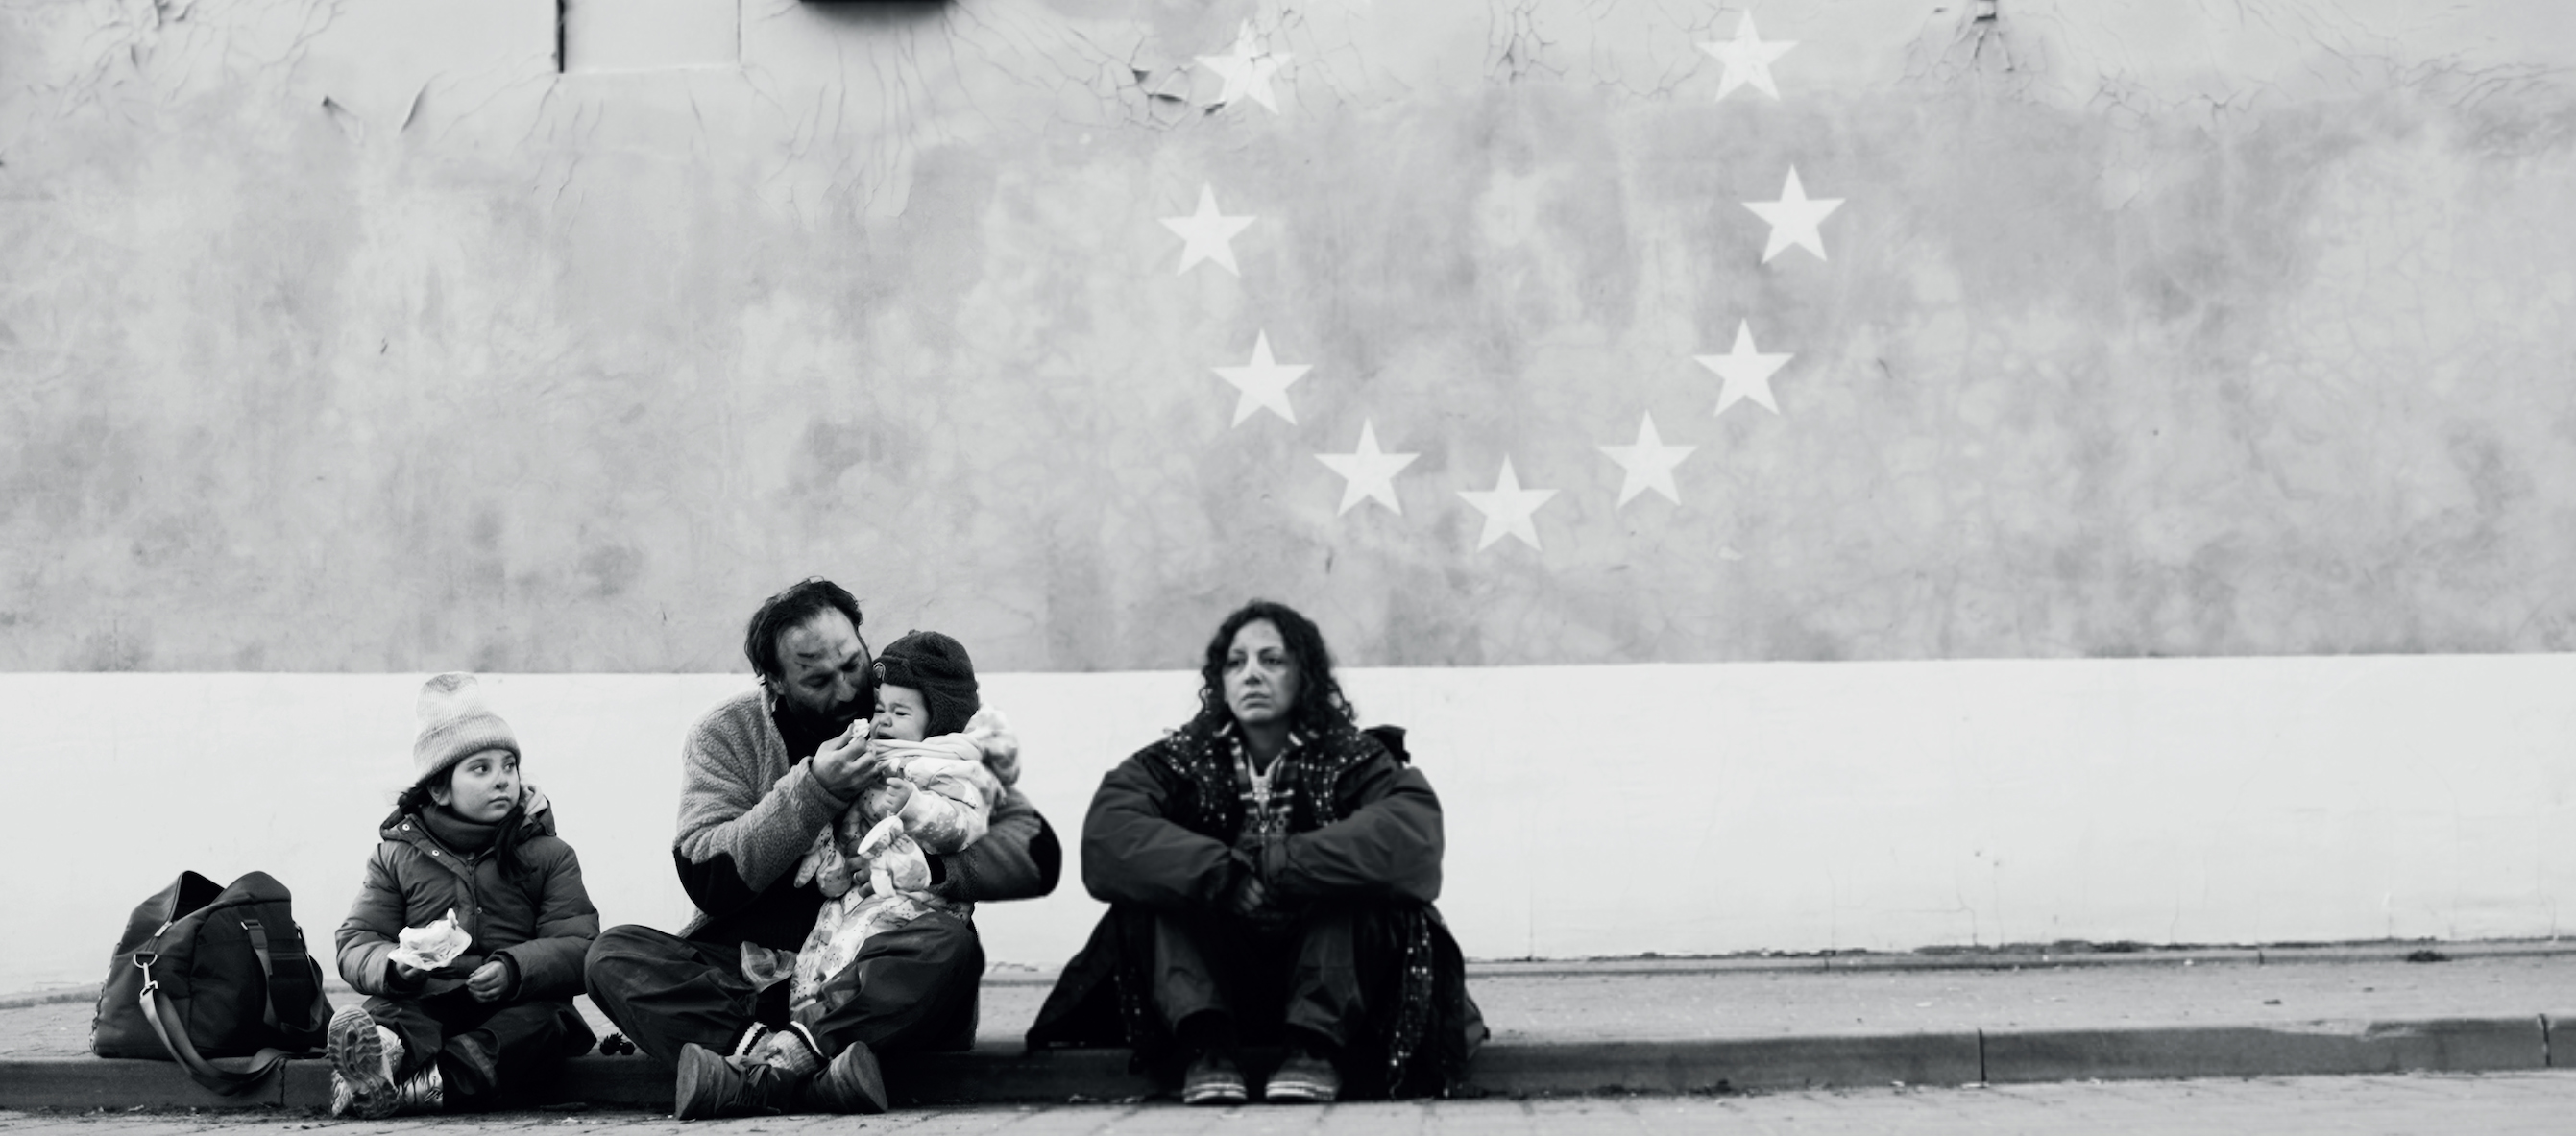 A family of four sits on the ground wearing winter coats in front of a wall with a circle of stars on it.